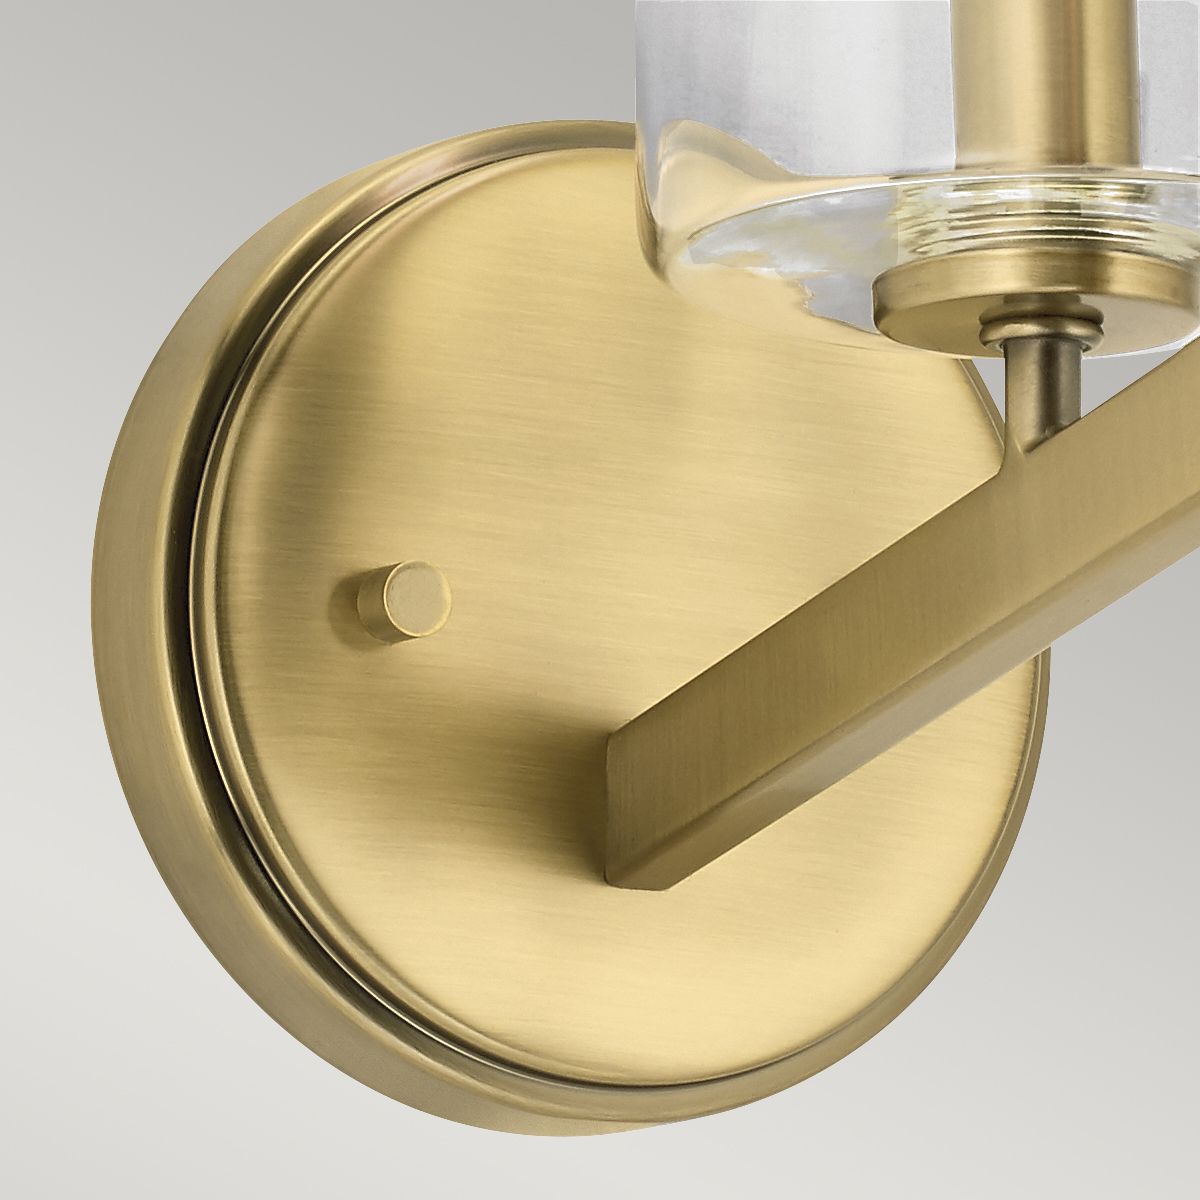 Single Wall Light in Brushed Natural Brass Finish